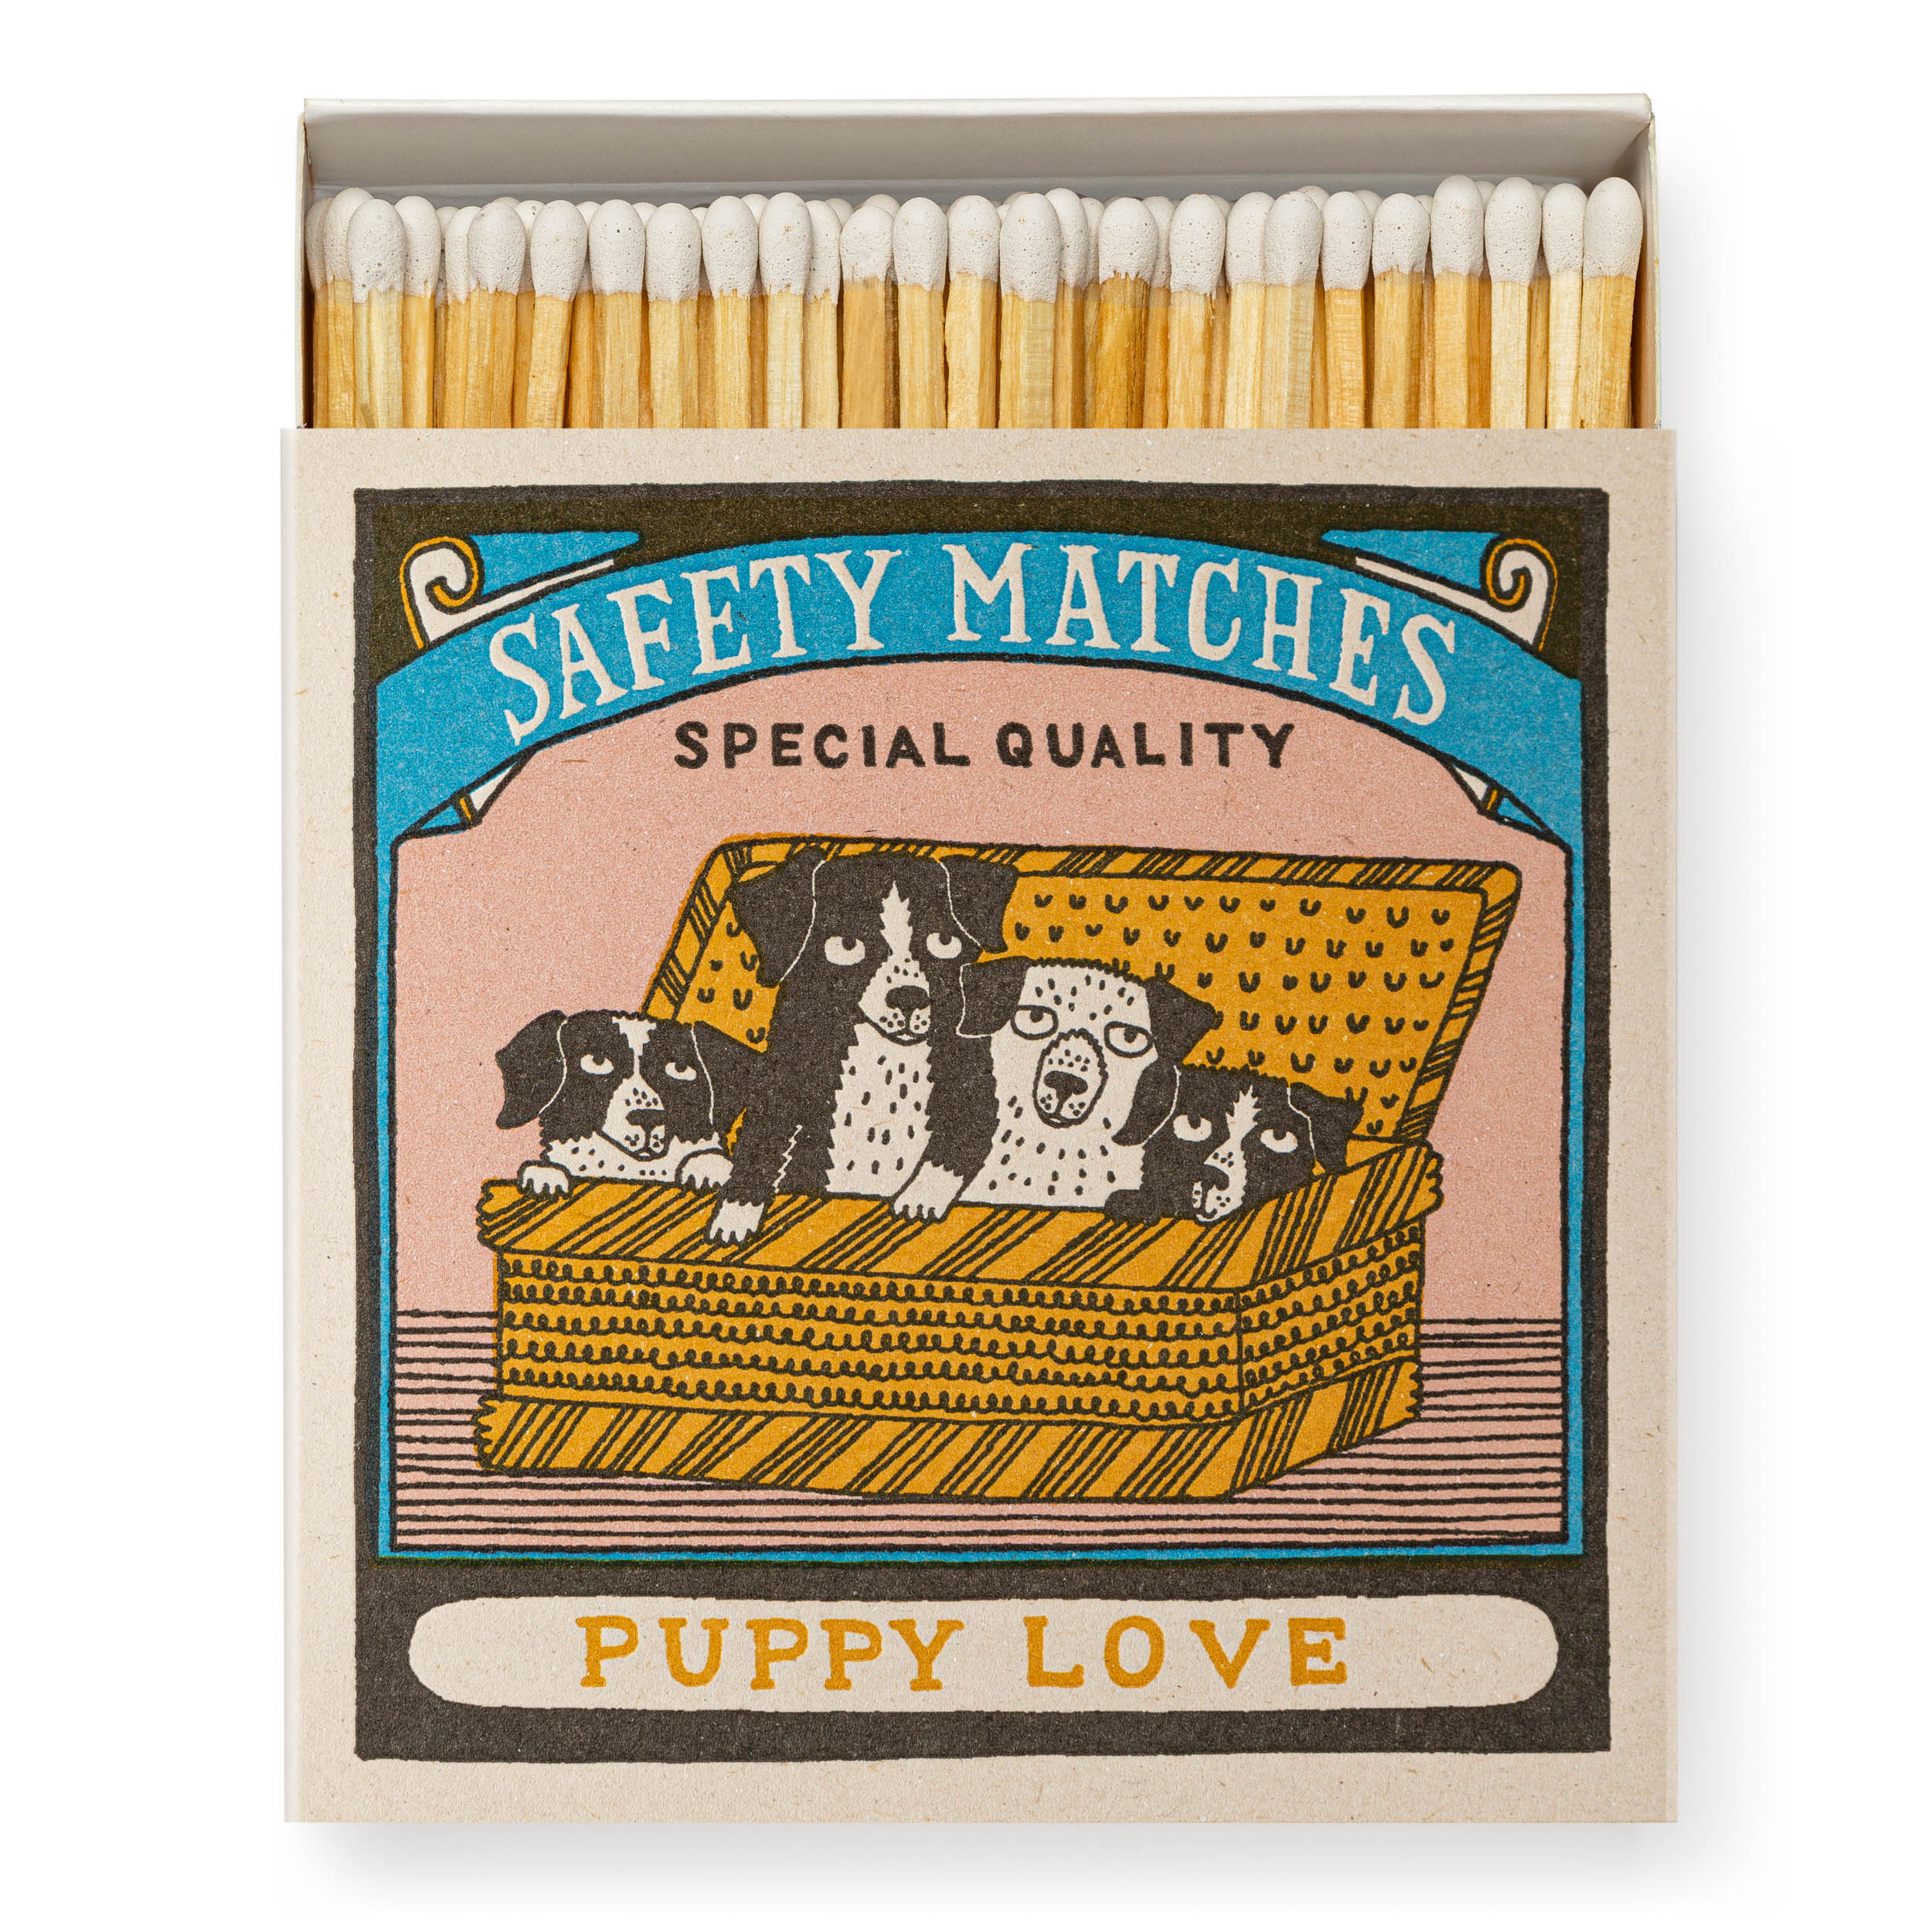 Puppy Love - Square Matchboxes - Charlotte Farmer - from Archivist Gallery 